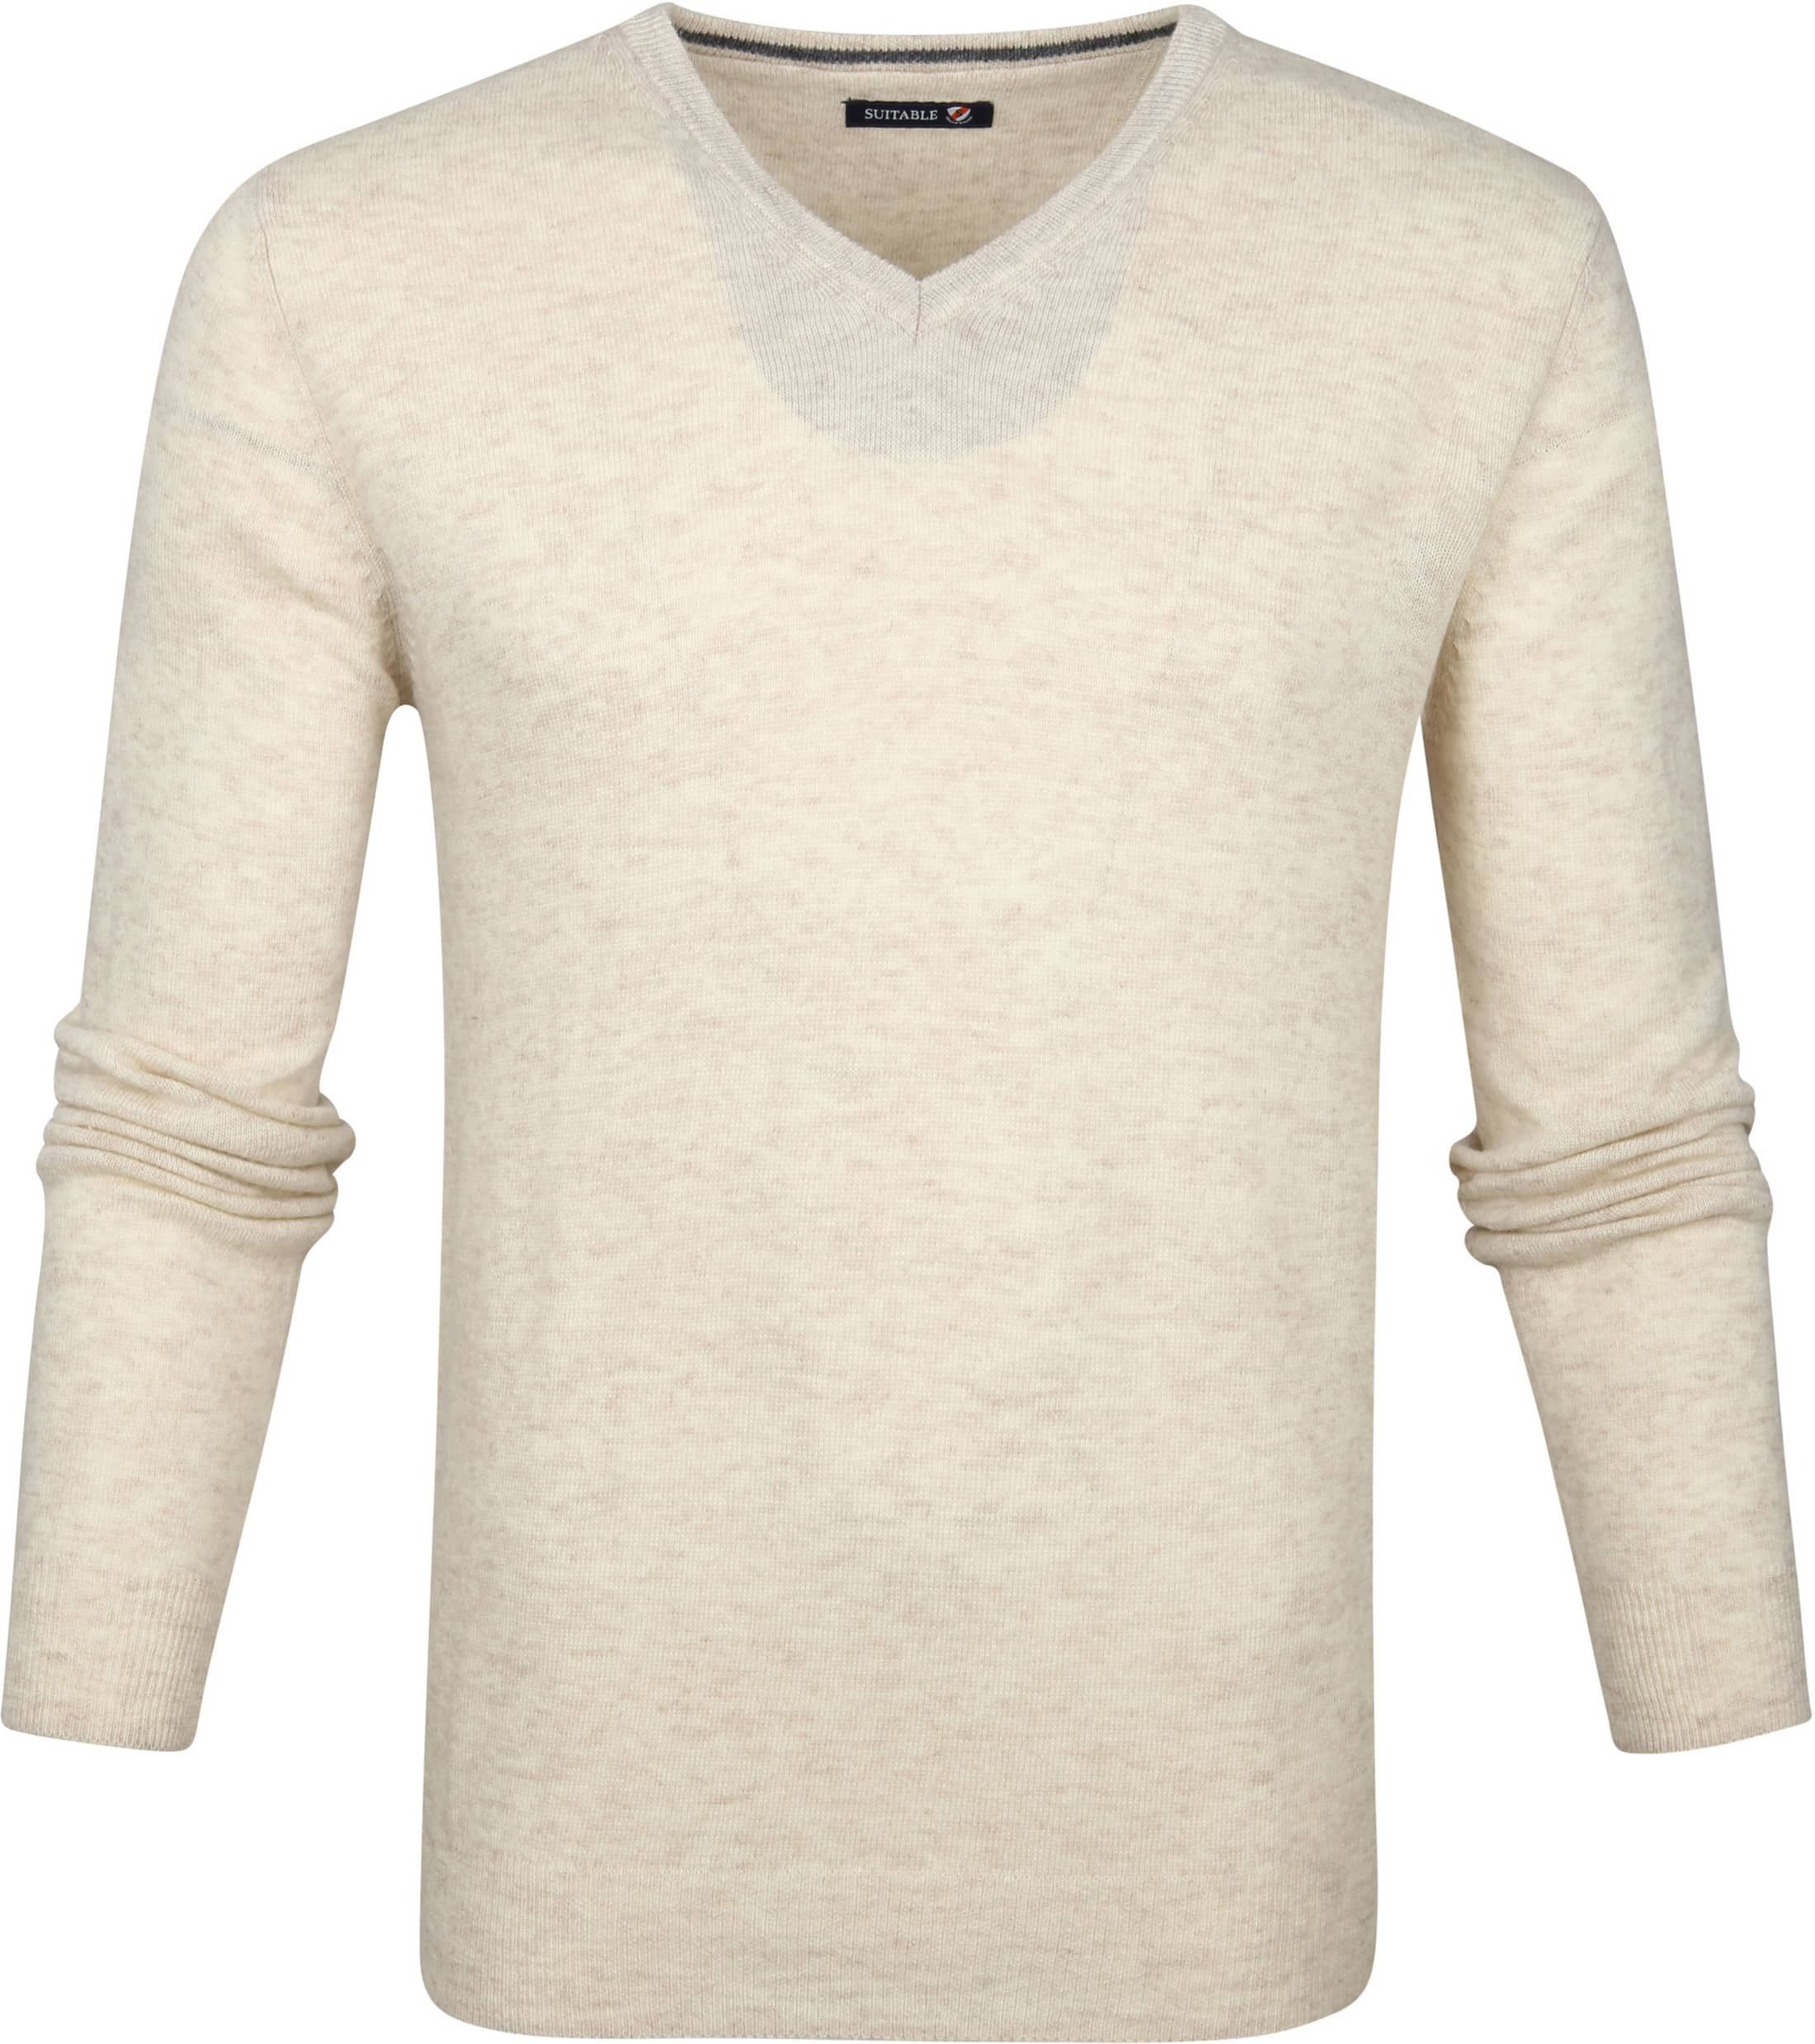 Suitable Lambswool Pullover V-Neck Beige size XL